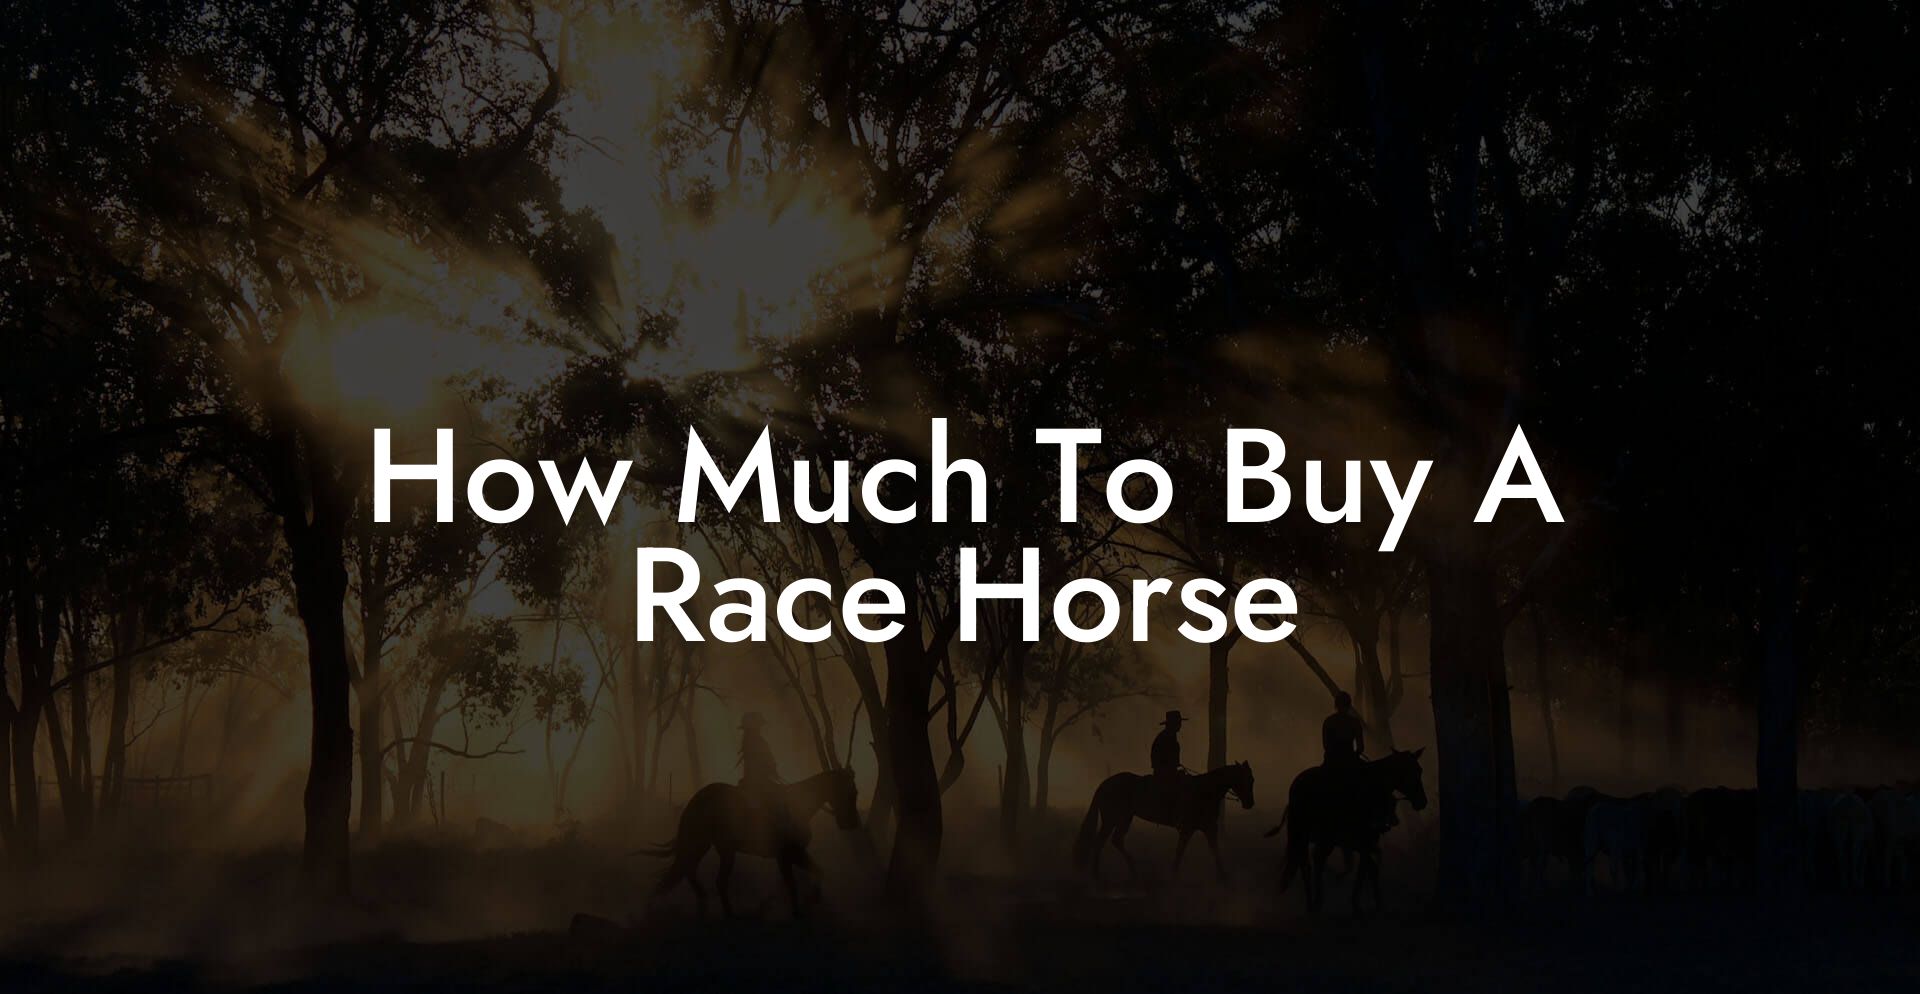 How Much To Buy A Race Horse